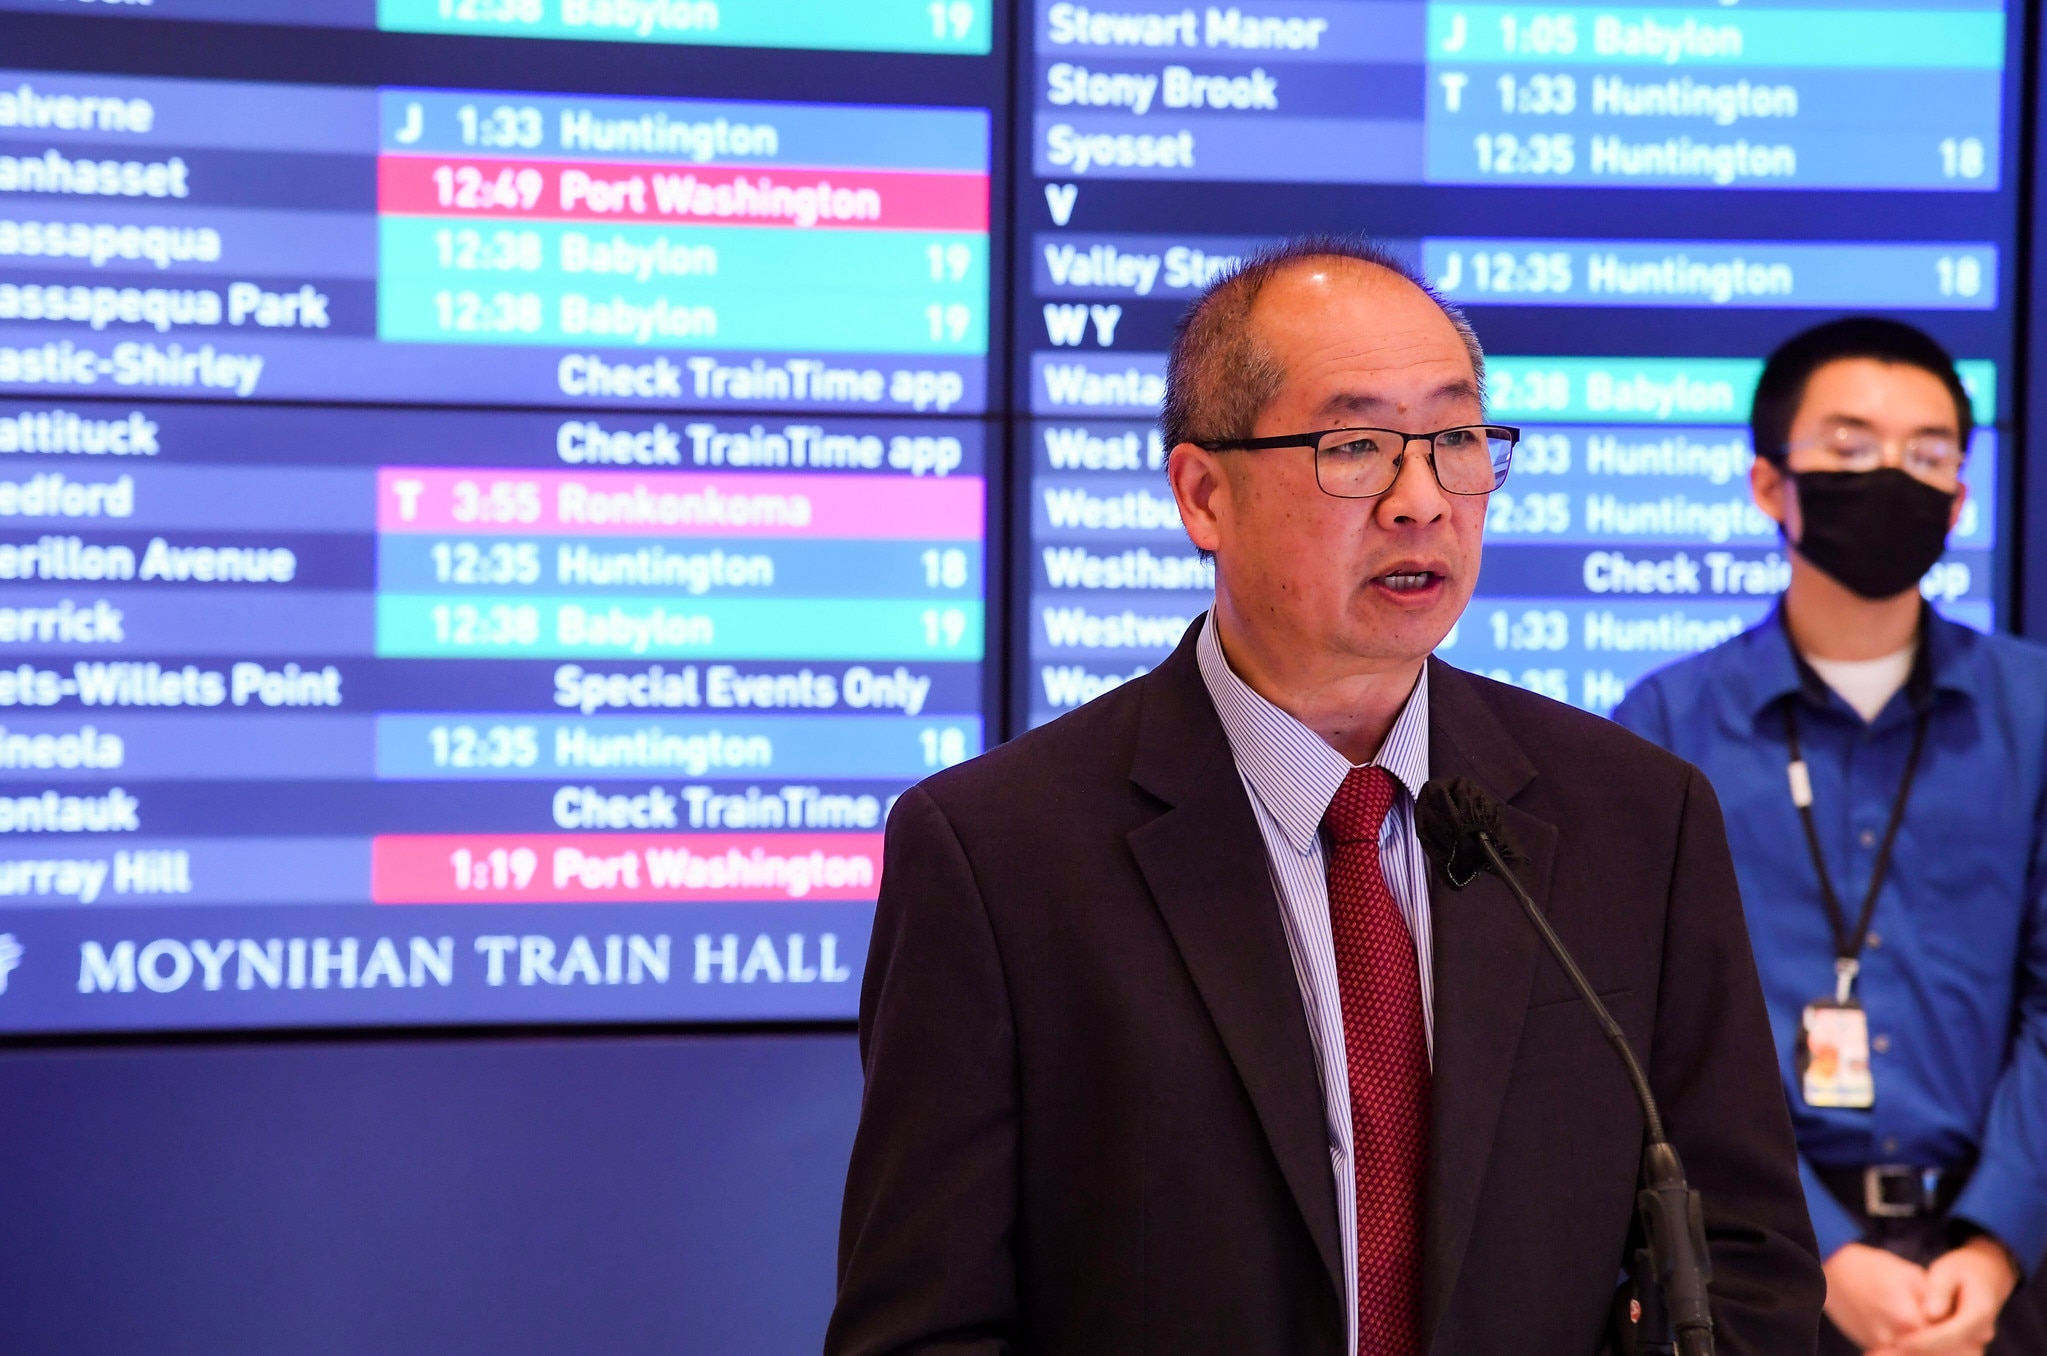 LIRR President Phil Eng announces update to LIRR TrainTime app at Moynihan Train Hall